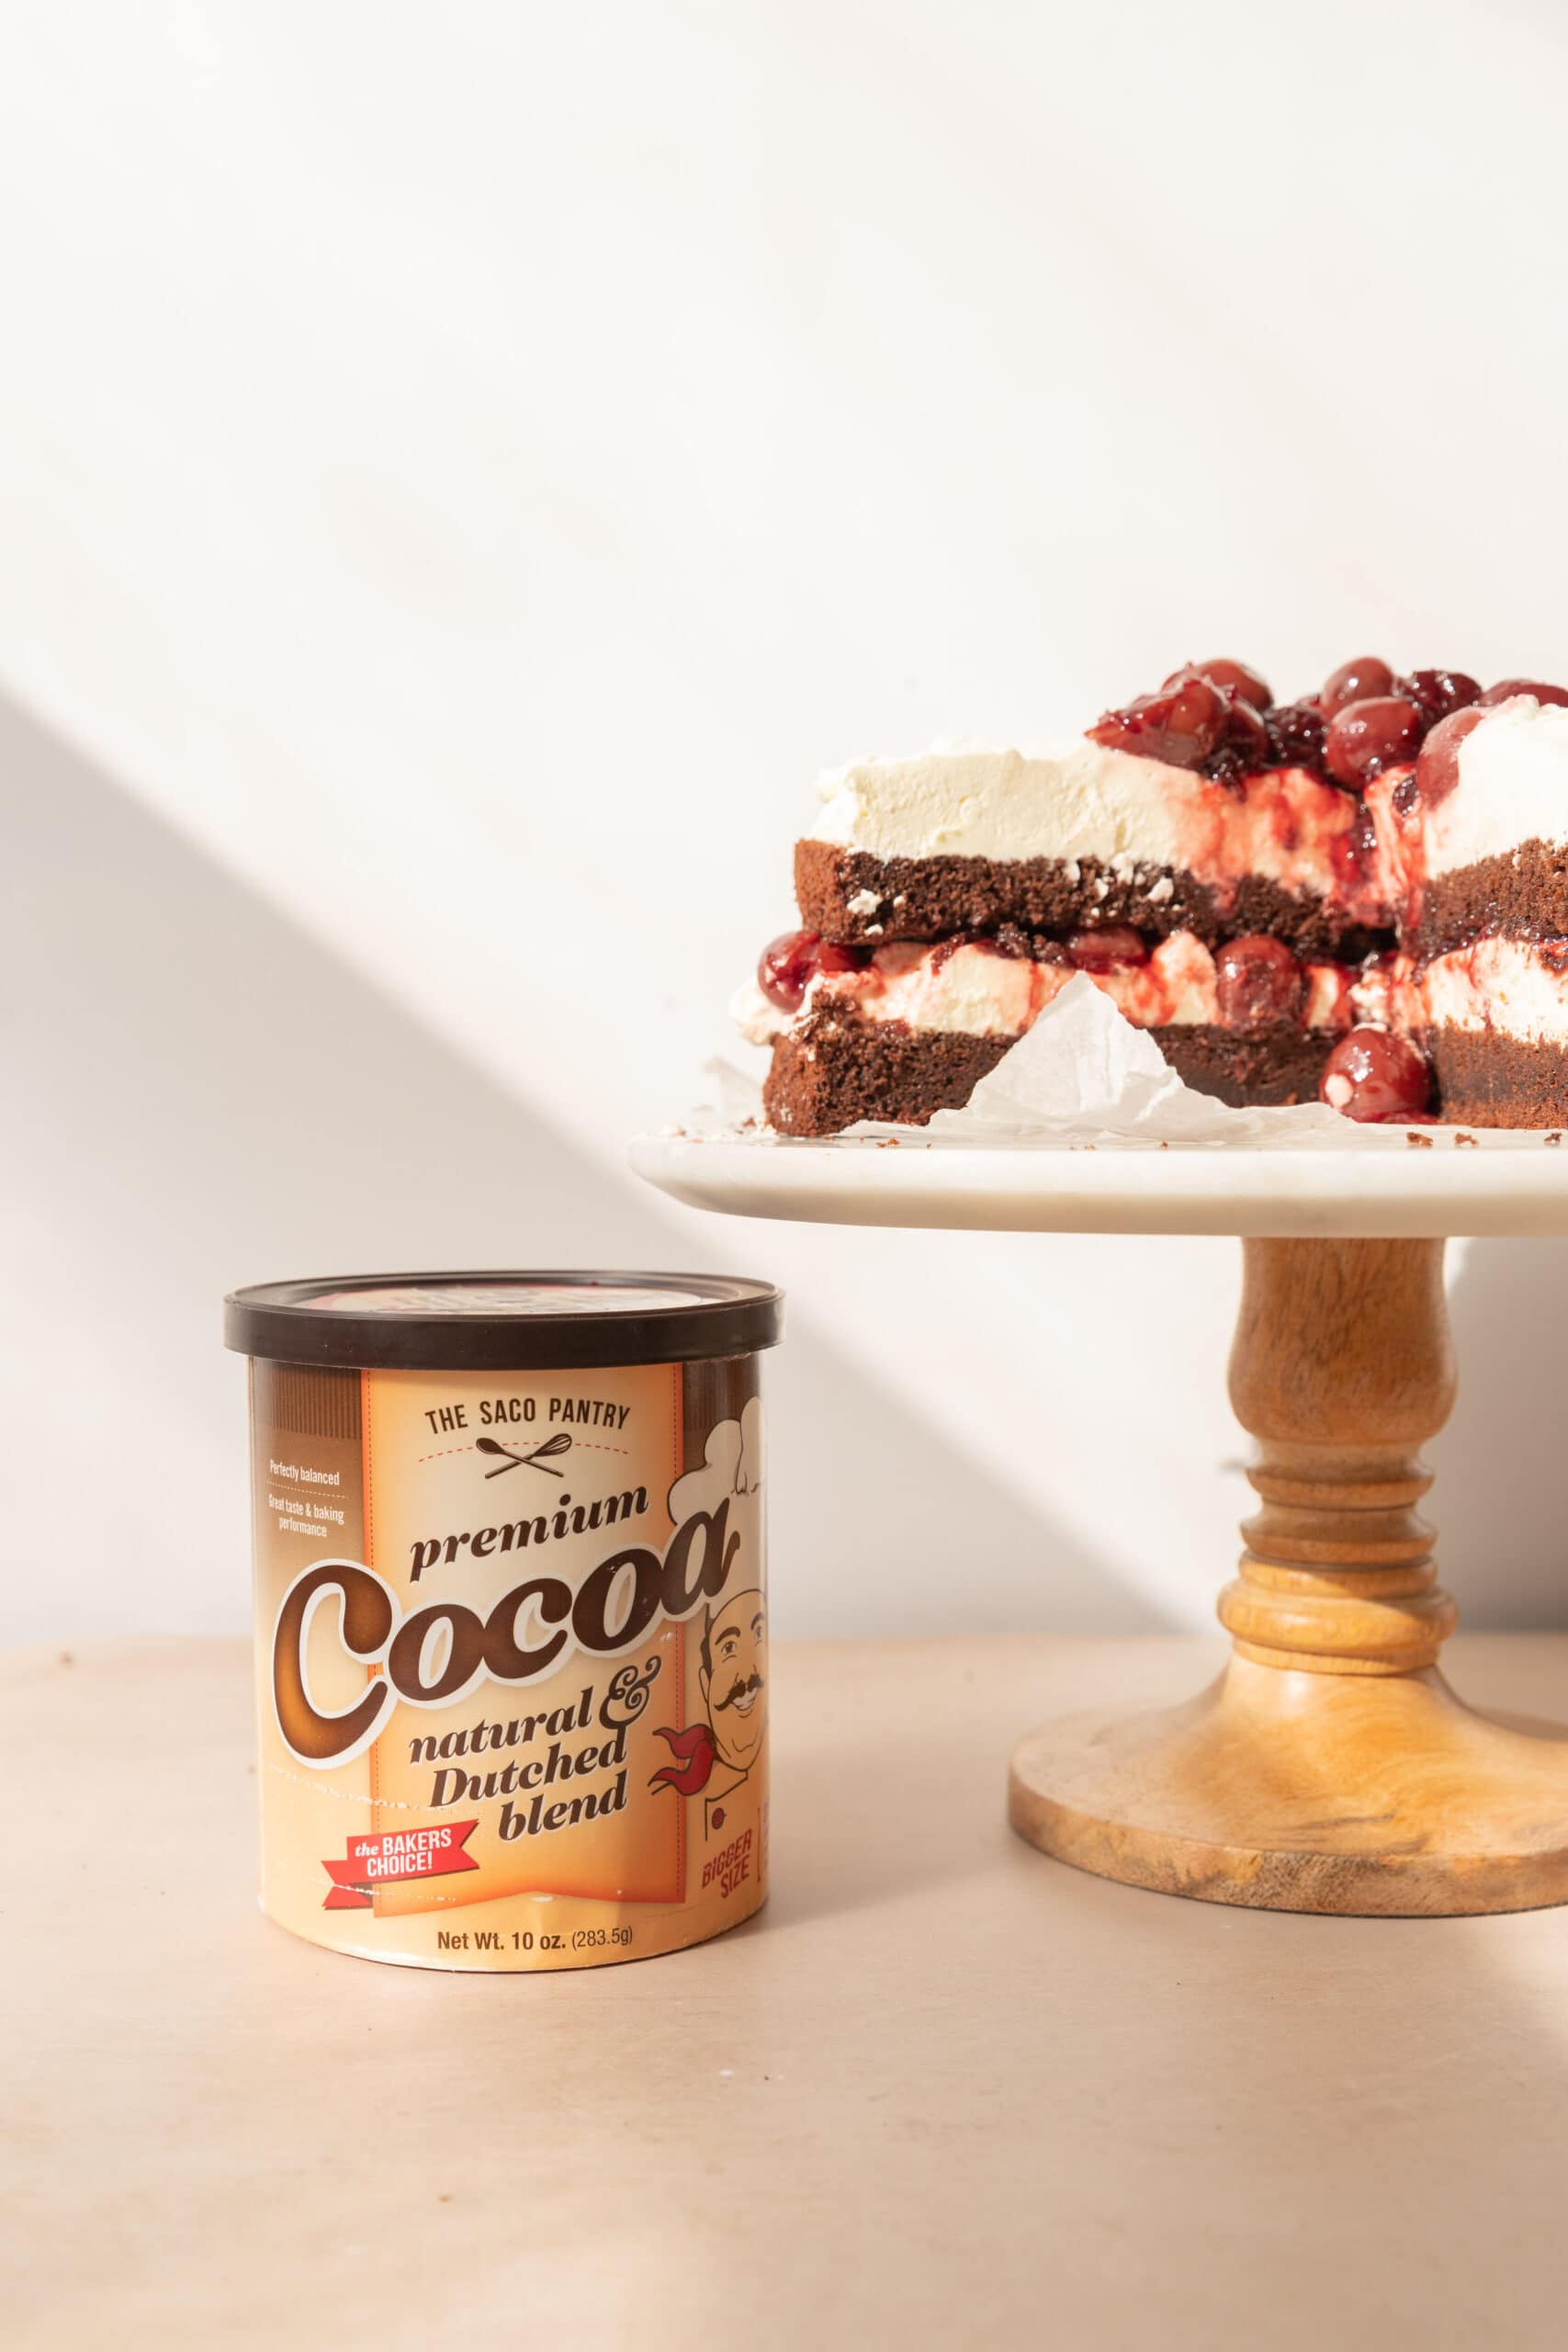 Image of Saco Cocoa powder container next to a cake stand with black forest cake on it.